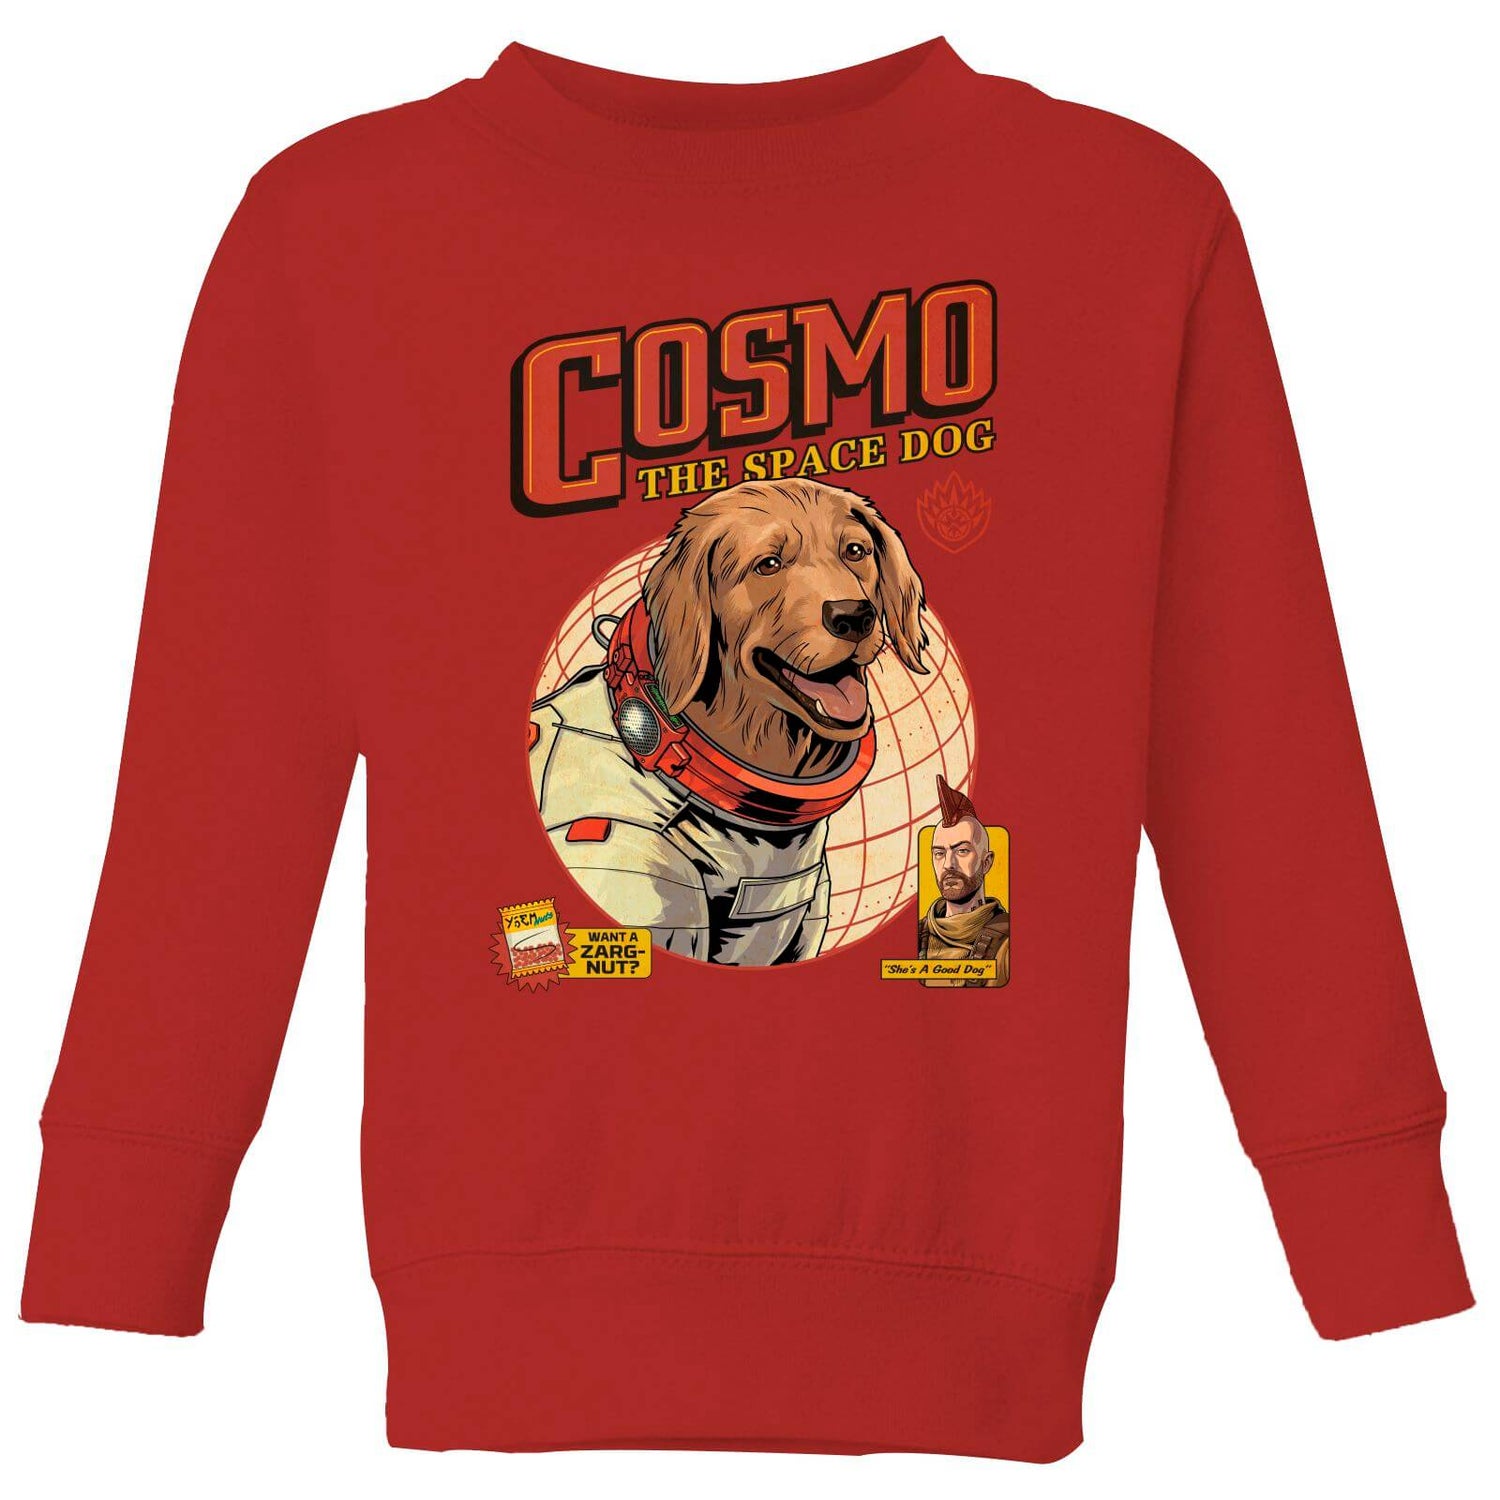 Guardians of the Galaxy Cosmo The Space Dog Kids' Sweatshirt - Red